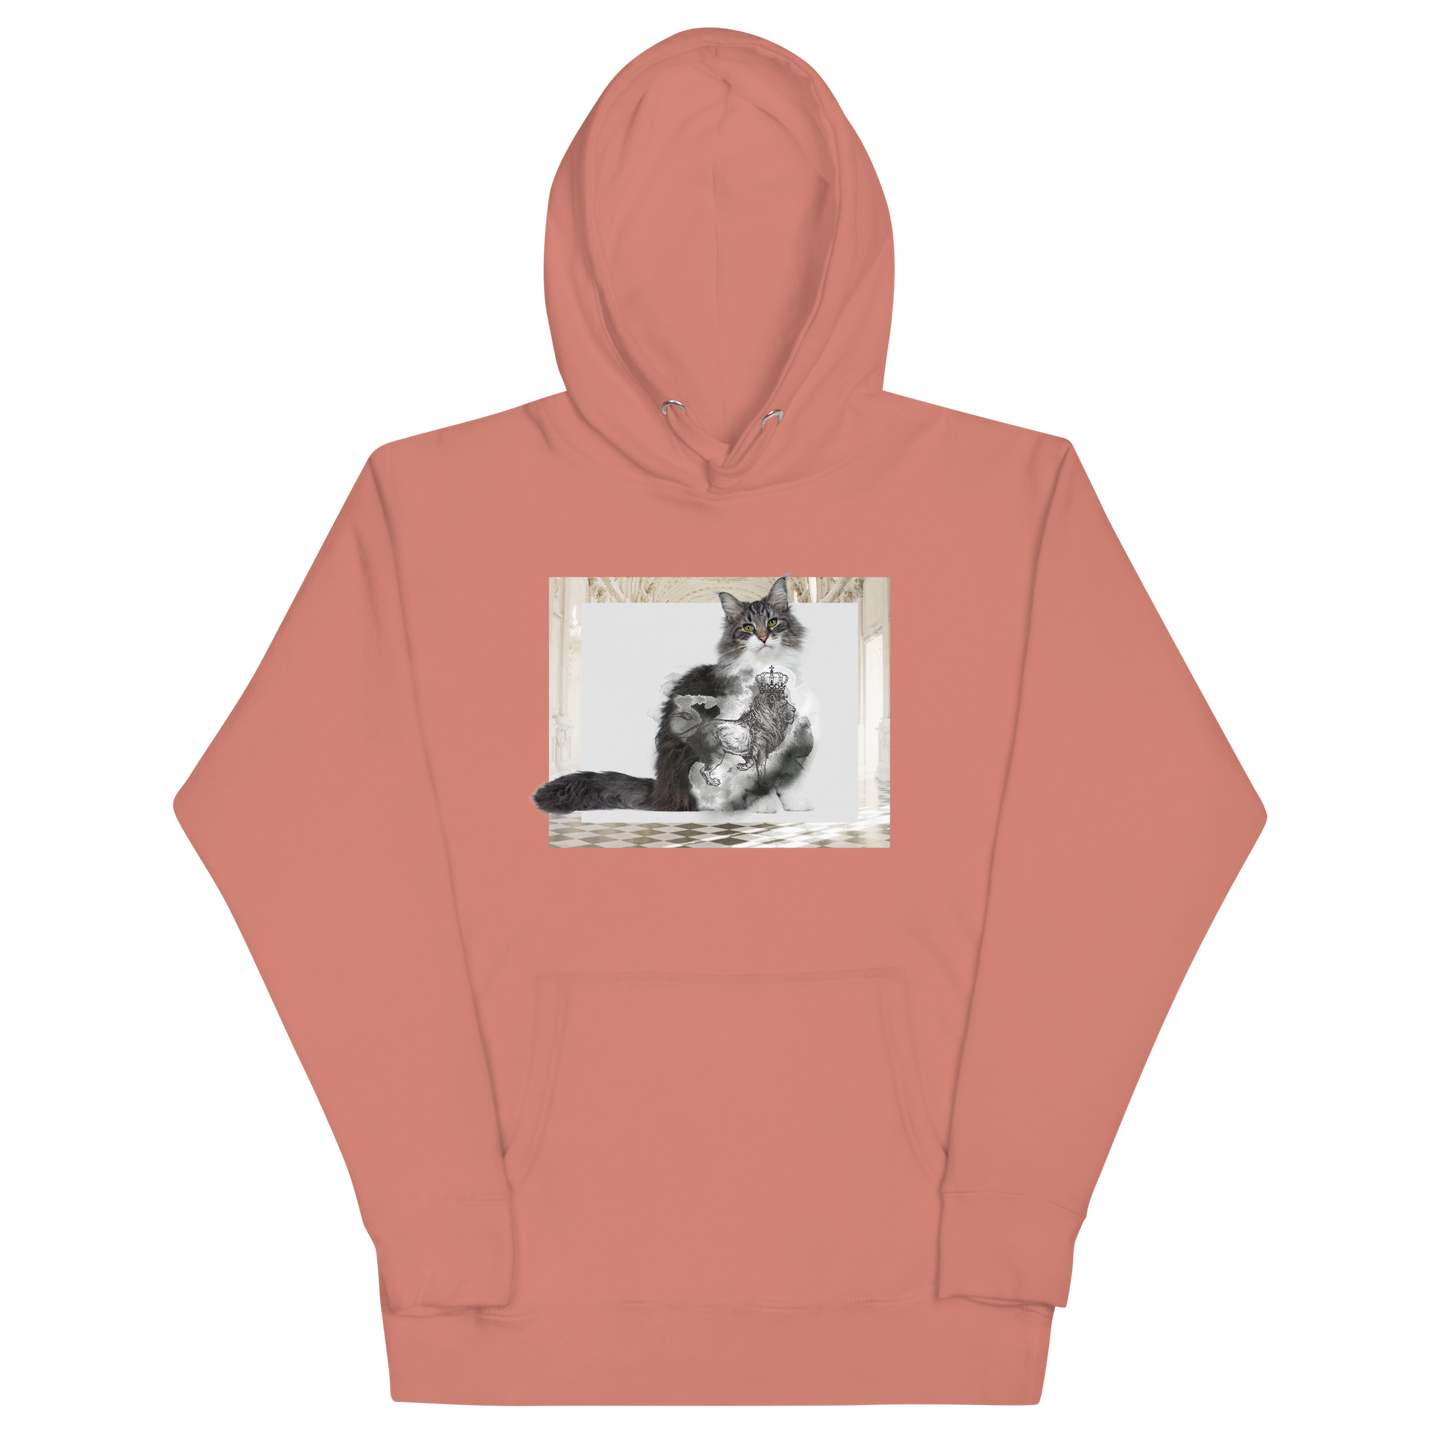 Dusty Rose Premium Cat Hoodie featuring a majestic Royal Cat graphic on the chest - Cool Graphic Cat Hoodies - Boozy Fox